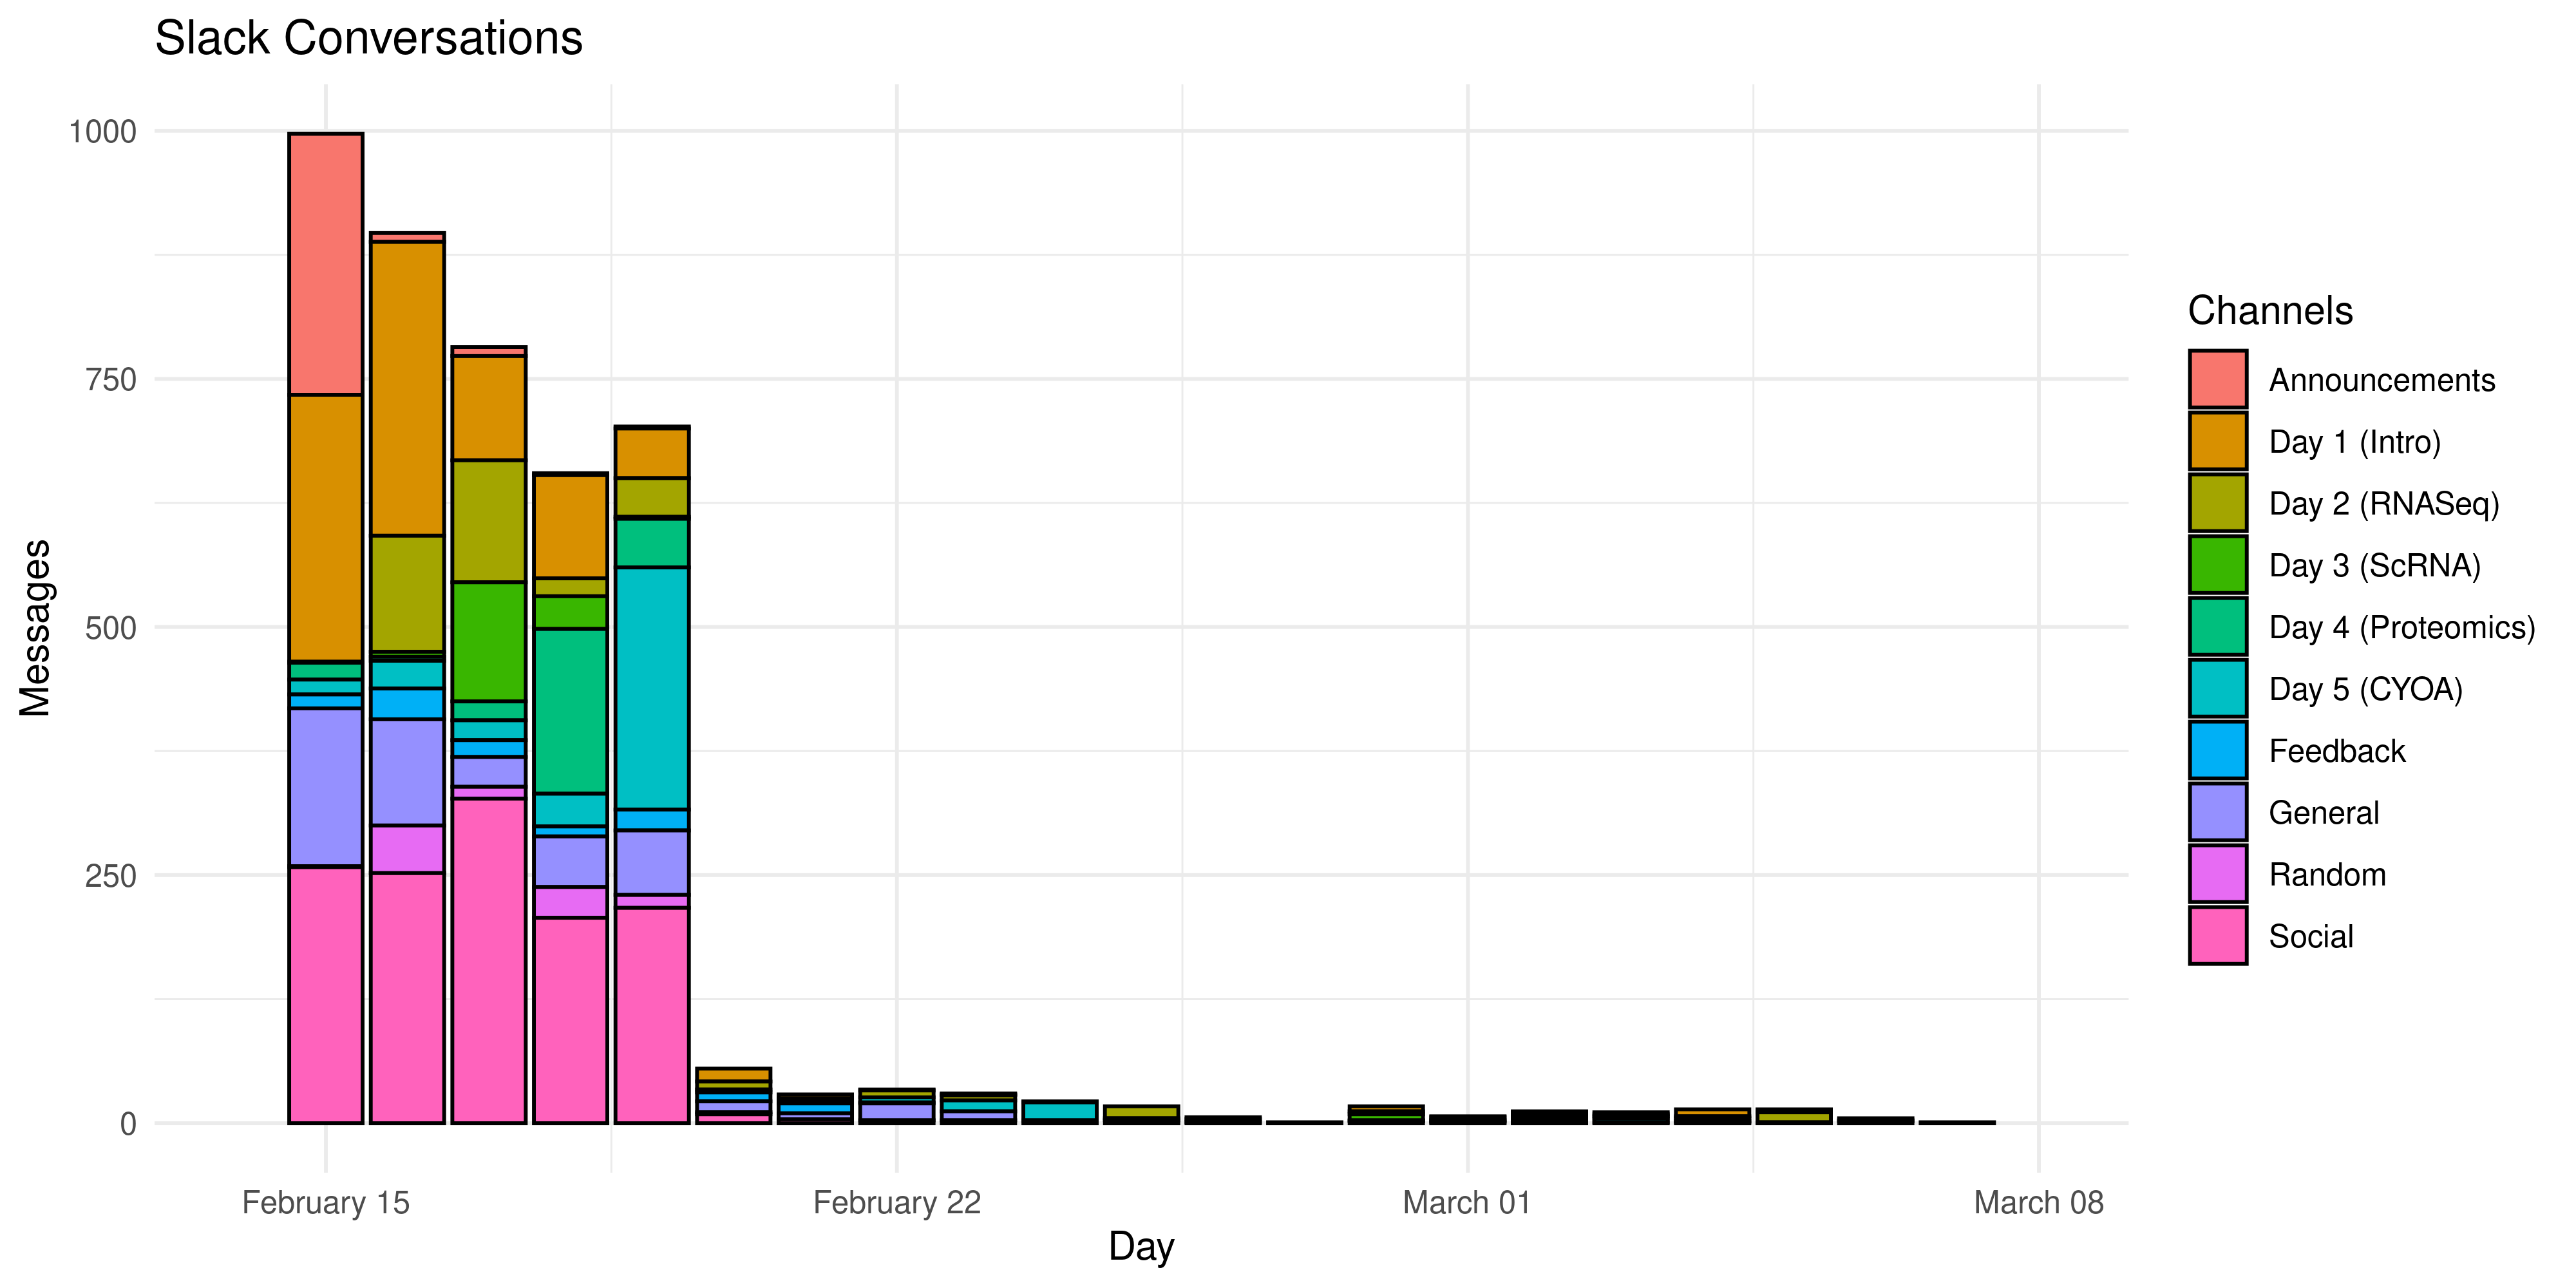 Identical to the previous slack message bar chart, but it extends until March 8th.